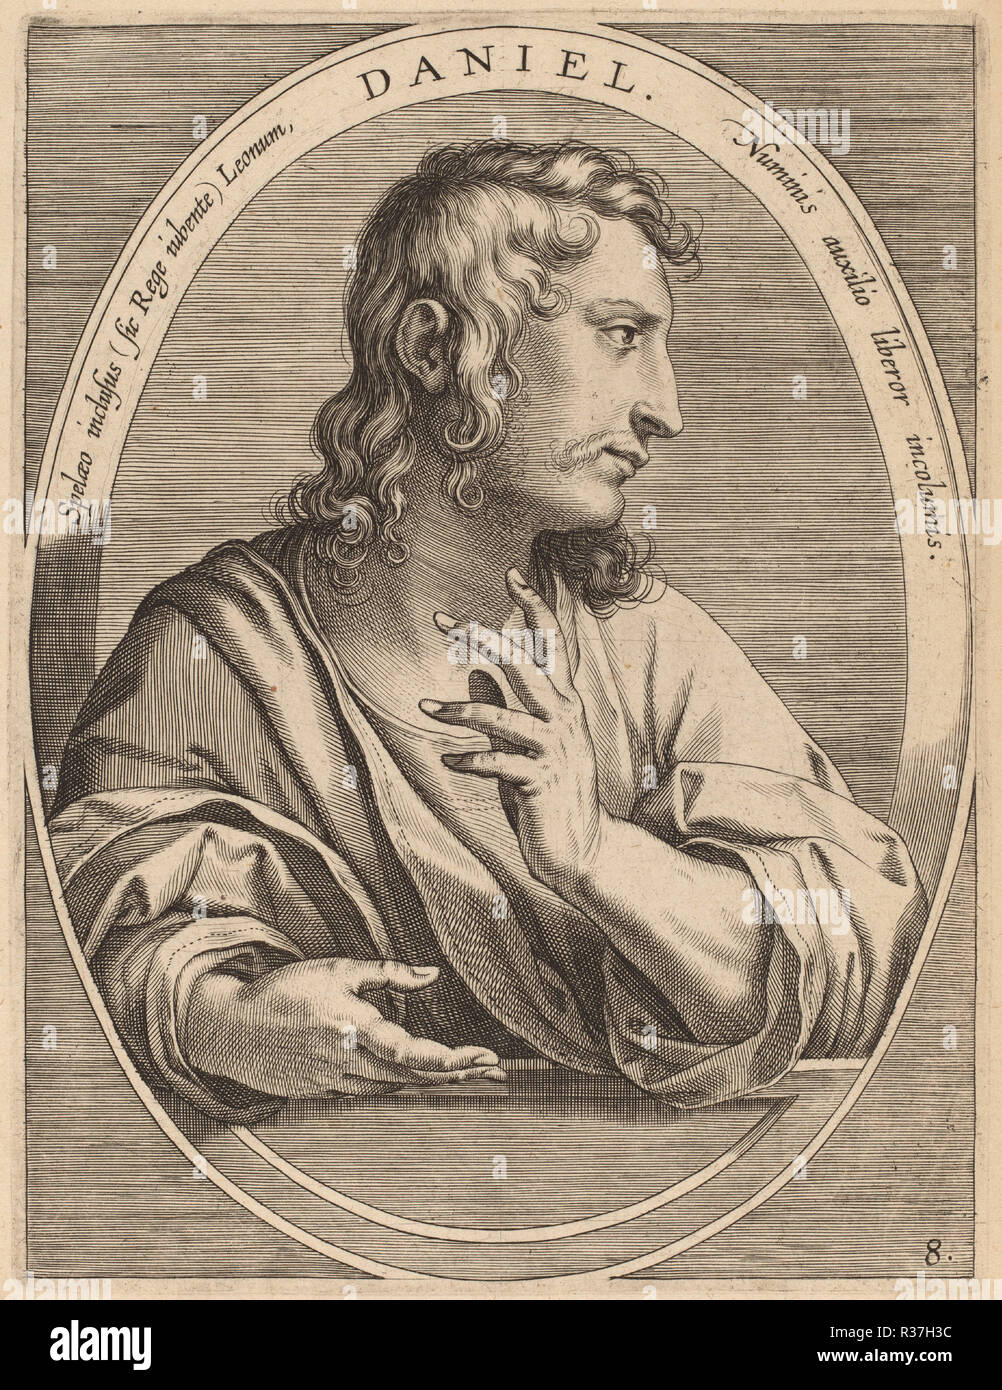 Daniel. Dated: published 1613. Dimensions: plate: 17.9 x 13.6 cm (7 1/16 x 5 3/8 in.)  sheet: 24.3 x 19 cm (9 9/16 x 7 1/2 in.). Medium: engraving on laid paper. Museum: National Gallery of Art, Washington DC. Author: Theodor Galle after Jan van der Straet. Stock Photo